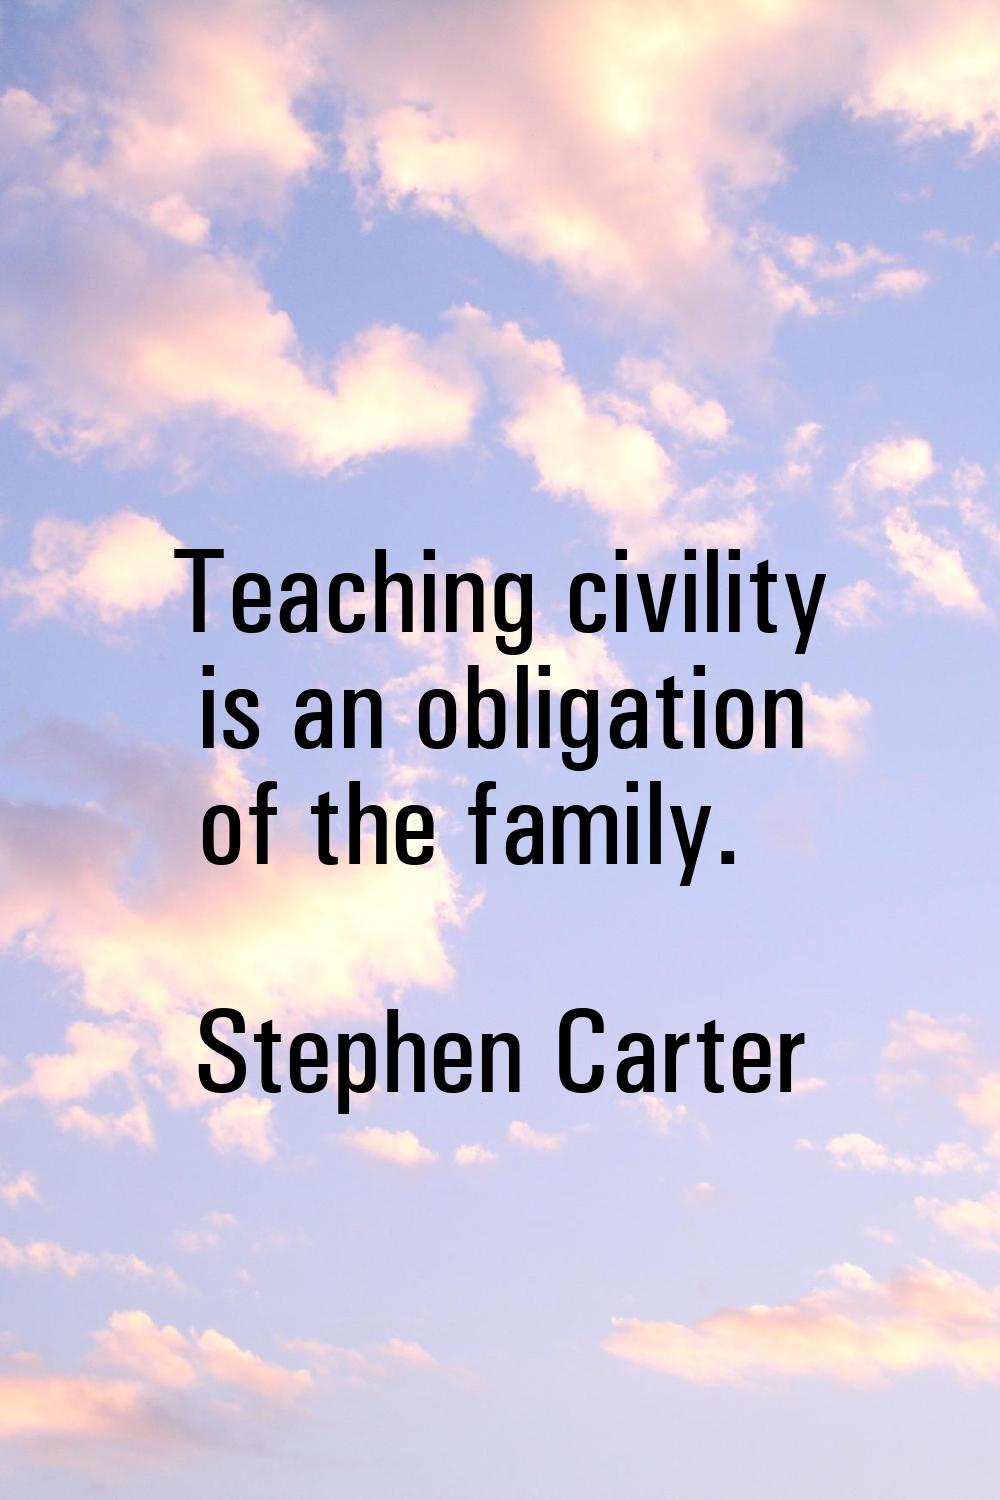 Teaching civility is an obligation of the family.